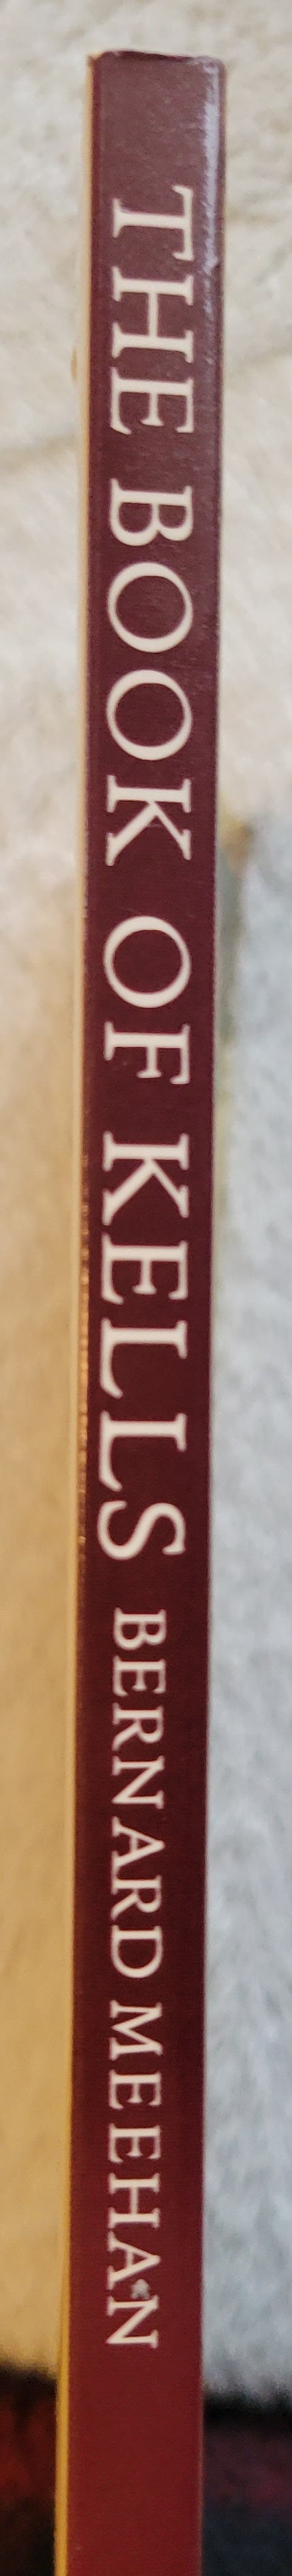  Used book for sale "The Book of Kells: An Illustrated Introduction to the Manuscript in Trinity College Dublin" by Bernard Meehan, published by Thames & Hudson, Ltd, copyright 1994, reprint in 2013. Spine.